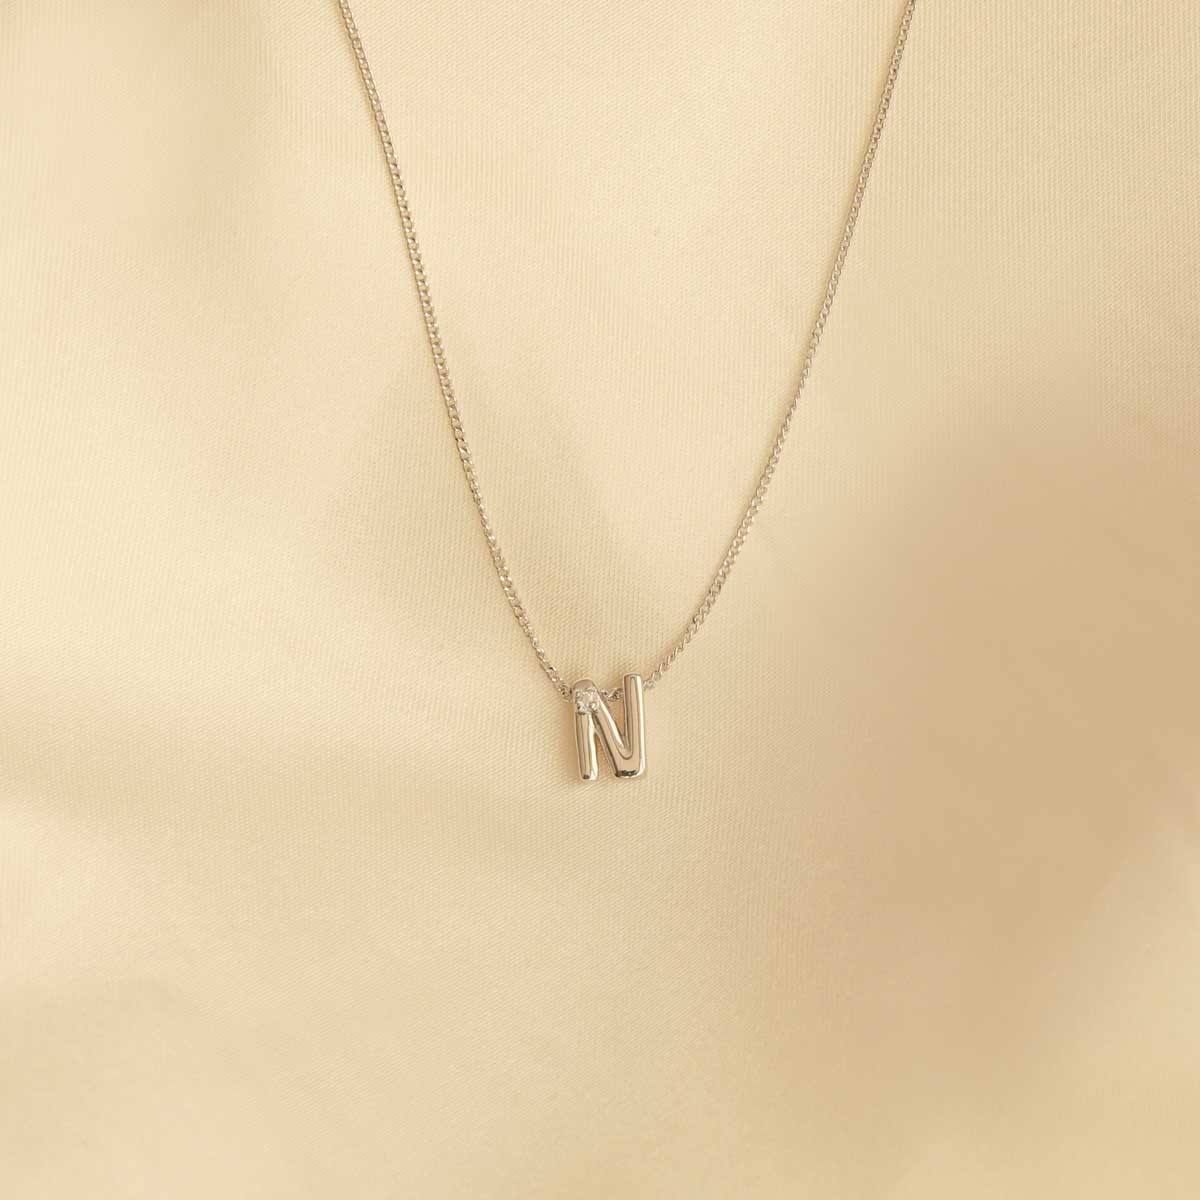 Flat lay shot of N Initial Pendant Necklace in Silver